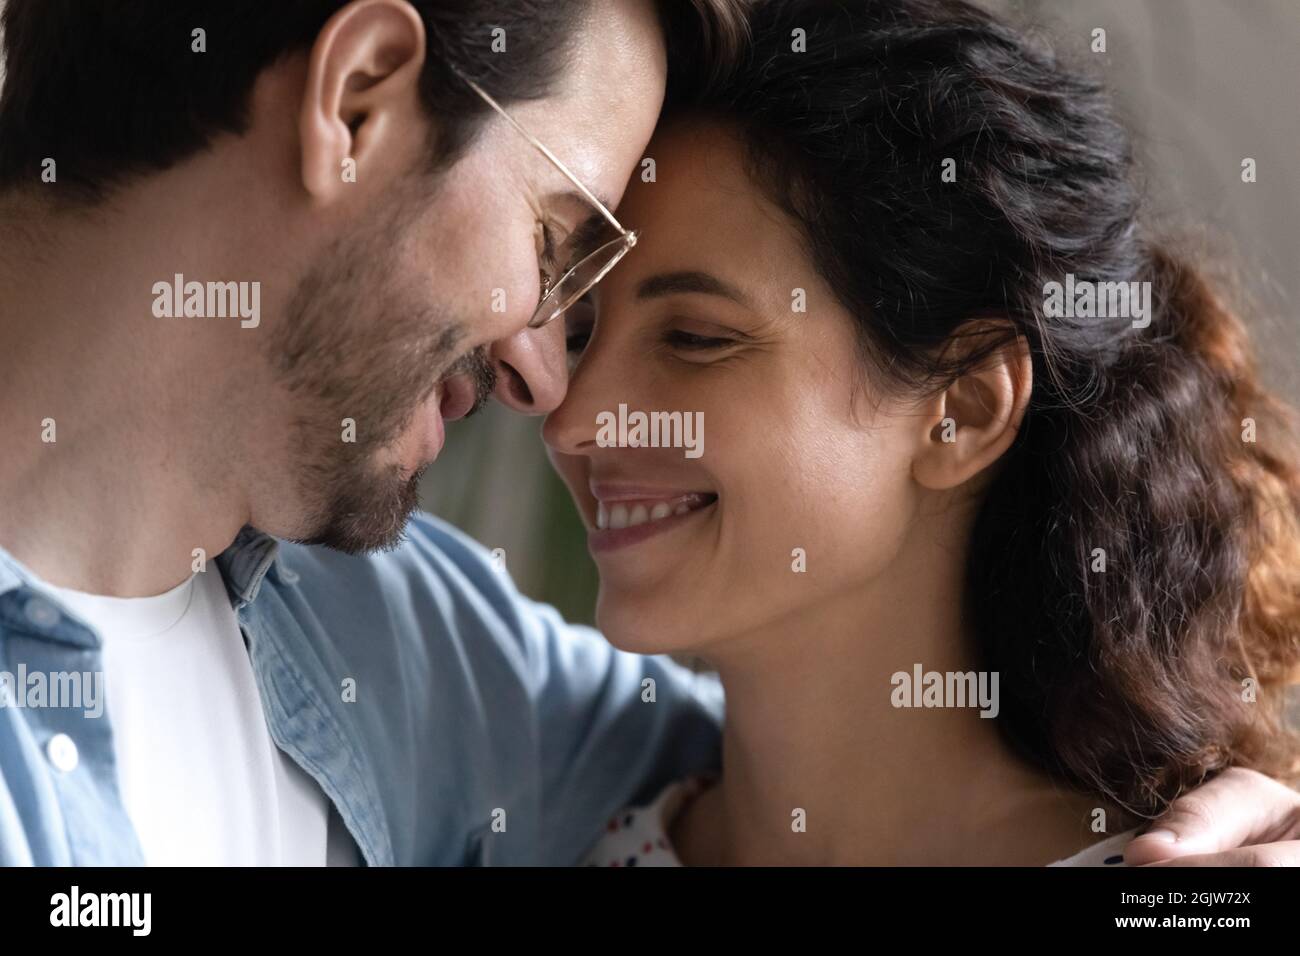 Close up smiling faces of loving young 30s couple Stock Photo